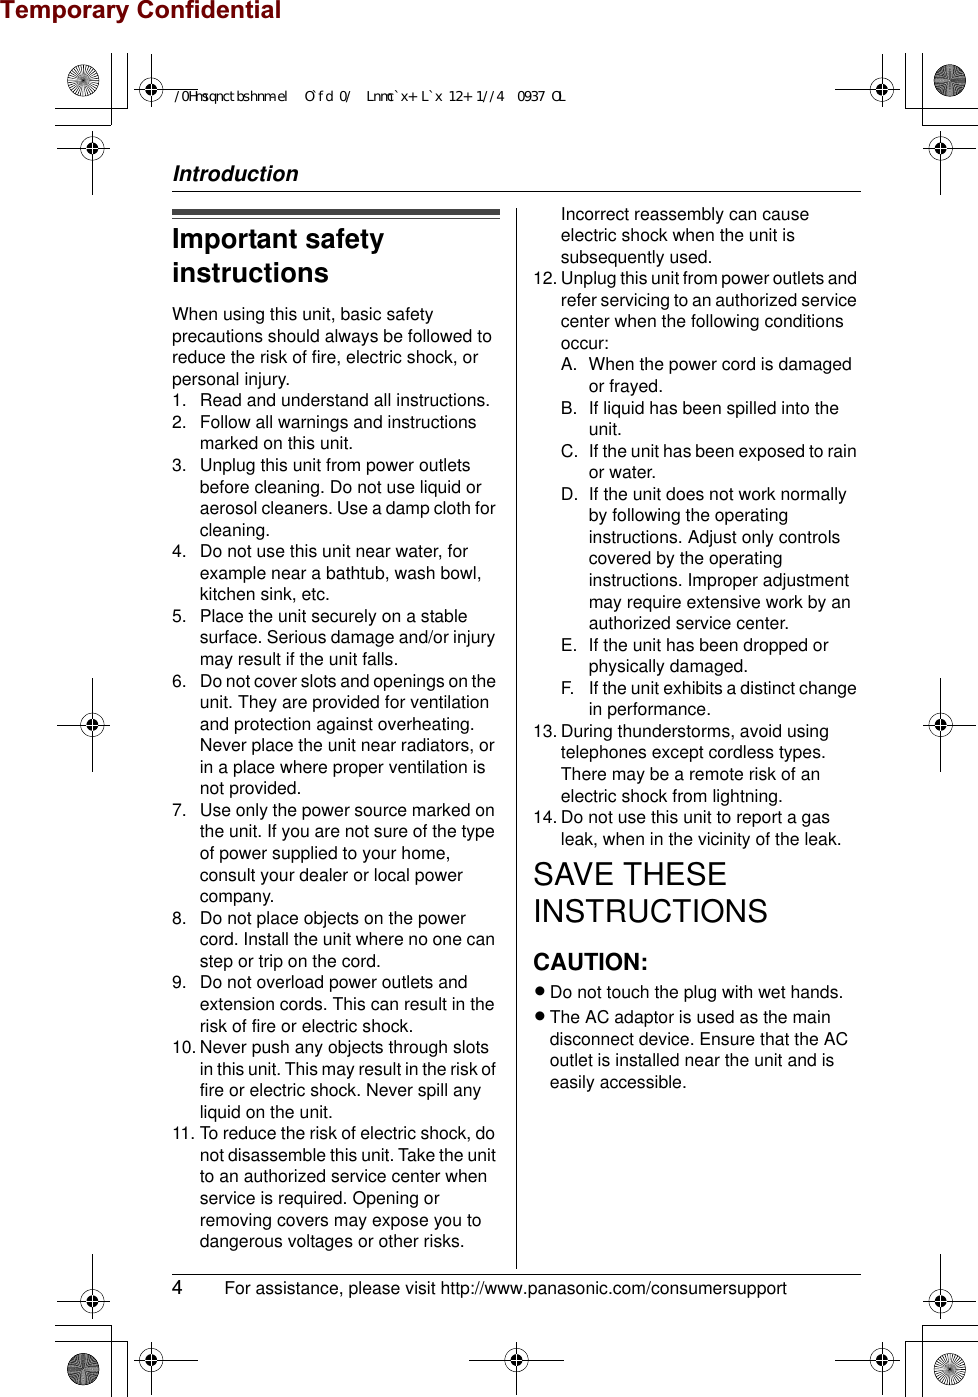 Temporary ConfidentialIntroduction4 For assistance, please visit http://www.panasonic.com/consumersupportImportant safety instructionsWhen using this unit, basic safety precautions should always be followed to reduce the risk of fire, electric shock, or personal injury.1. Read and understand all instructions.2. Follow all warnings and instructions marked on this unit.3. Unplug this unit from power outlets before cleaning. Do not use liquid or aerosol cleaners. Use a damp cloth for cleaning.4. Do not use this unit near water, for example near a bathtub, wash bowl, kitchen sink, etc.5. Place the unit securely on a stable surface. Serious damage and/or injury may result if the unit falls.6. Do not cover slots and openings on the unit. They are provided for ventilation and protection against overheating. Never place the unit near radiators, or in a place where proper ventilation is not provided.7. Use only the power source marked on the unit. If you are not sure of the type of power supplied to your home, consult your dealer or local power company.8. Do not place objects on the power cord. Install the unit where no one can step or trip on the cord.9. Do not overload power outlets and extension cords. This can result in the risk of fire or electric shock.10. Never push any objects through slots in this unit. This may result in the risk of fire or electric shock. Never spill any liquid on the unit.11. To reduce the risk of electric shock, do not disassemble this unit. Take the unit to an authorized service center when service is required. Opening or removing covers may expose you to dangerous voltages or other risks. Incorrect reassembly can cause electric shock when the unit is subsequently used.12. Unplug this unit from power outlets and refer servicing to an authorized service center when the following conditions occur:A. When the power cord is damaged or frayed.B. If liquid has been spilled into the unit.C. If the unit has been exposed to rain or water.D. If the unit does not work normally by following the operating instructions. Adjust only controls covered by the operating instructions. Improper adjustment may require extensive work by an authorized service center.E. If the unit has been dropped or physically damaged.F. If the unit exhibits a distinct change in performance.13. During thunderstorms, avoid using telephones except cordless types. There may be a remote risk of an electric shock from lightning.14. Do not use this unit to report a gas leak, when in the vicinity of the leak.SAVE THESE INSTRUCTIONSCAUTION:LDo not touch the plug with wet hands.LThe AC adaptor is used as the main disconnect device. Ensure that the AC outlet is installed near the unit and is easily accessible.+PVTQFWEVKQPHO2CIG/QPFC[/C[2/